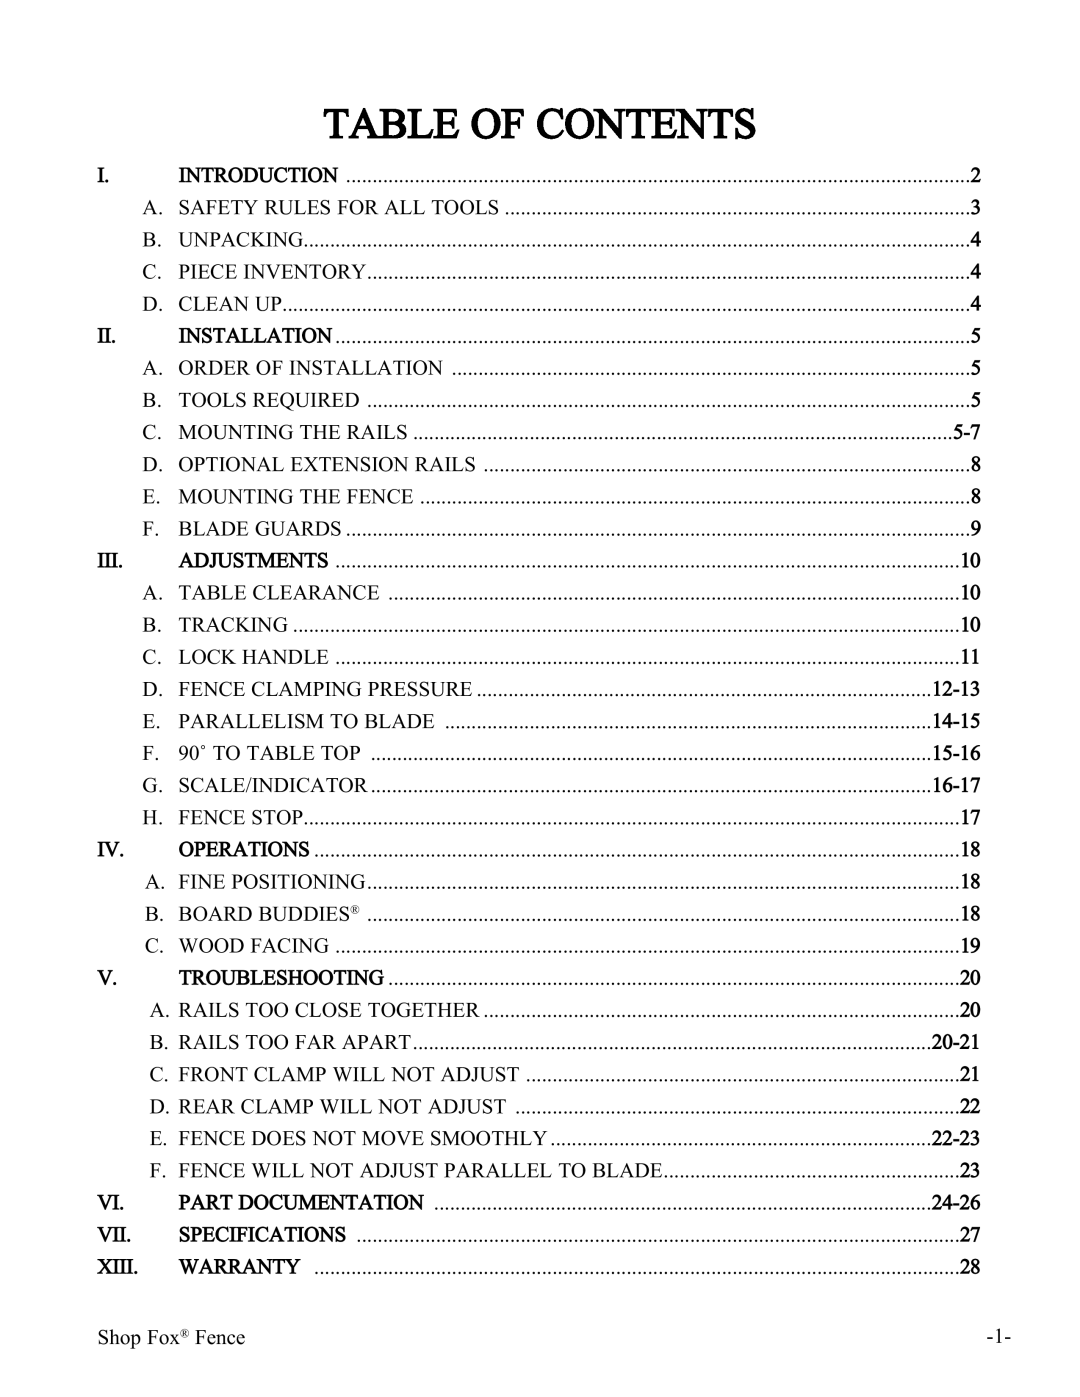 Woodstock W1410 manual Table Of Contents 